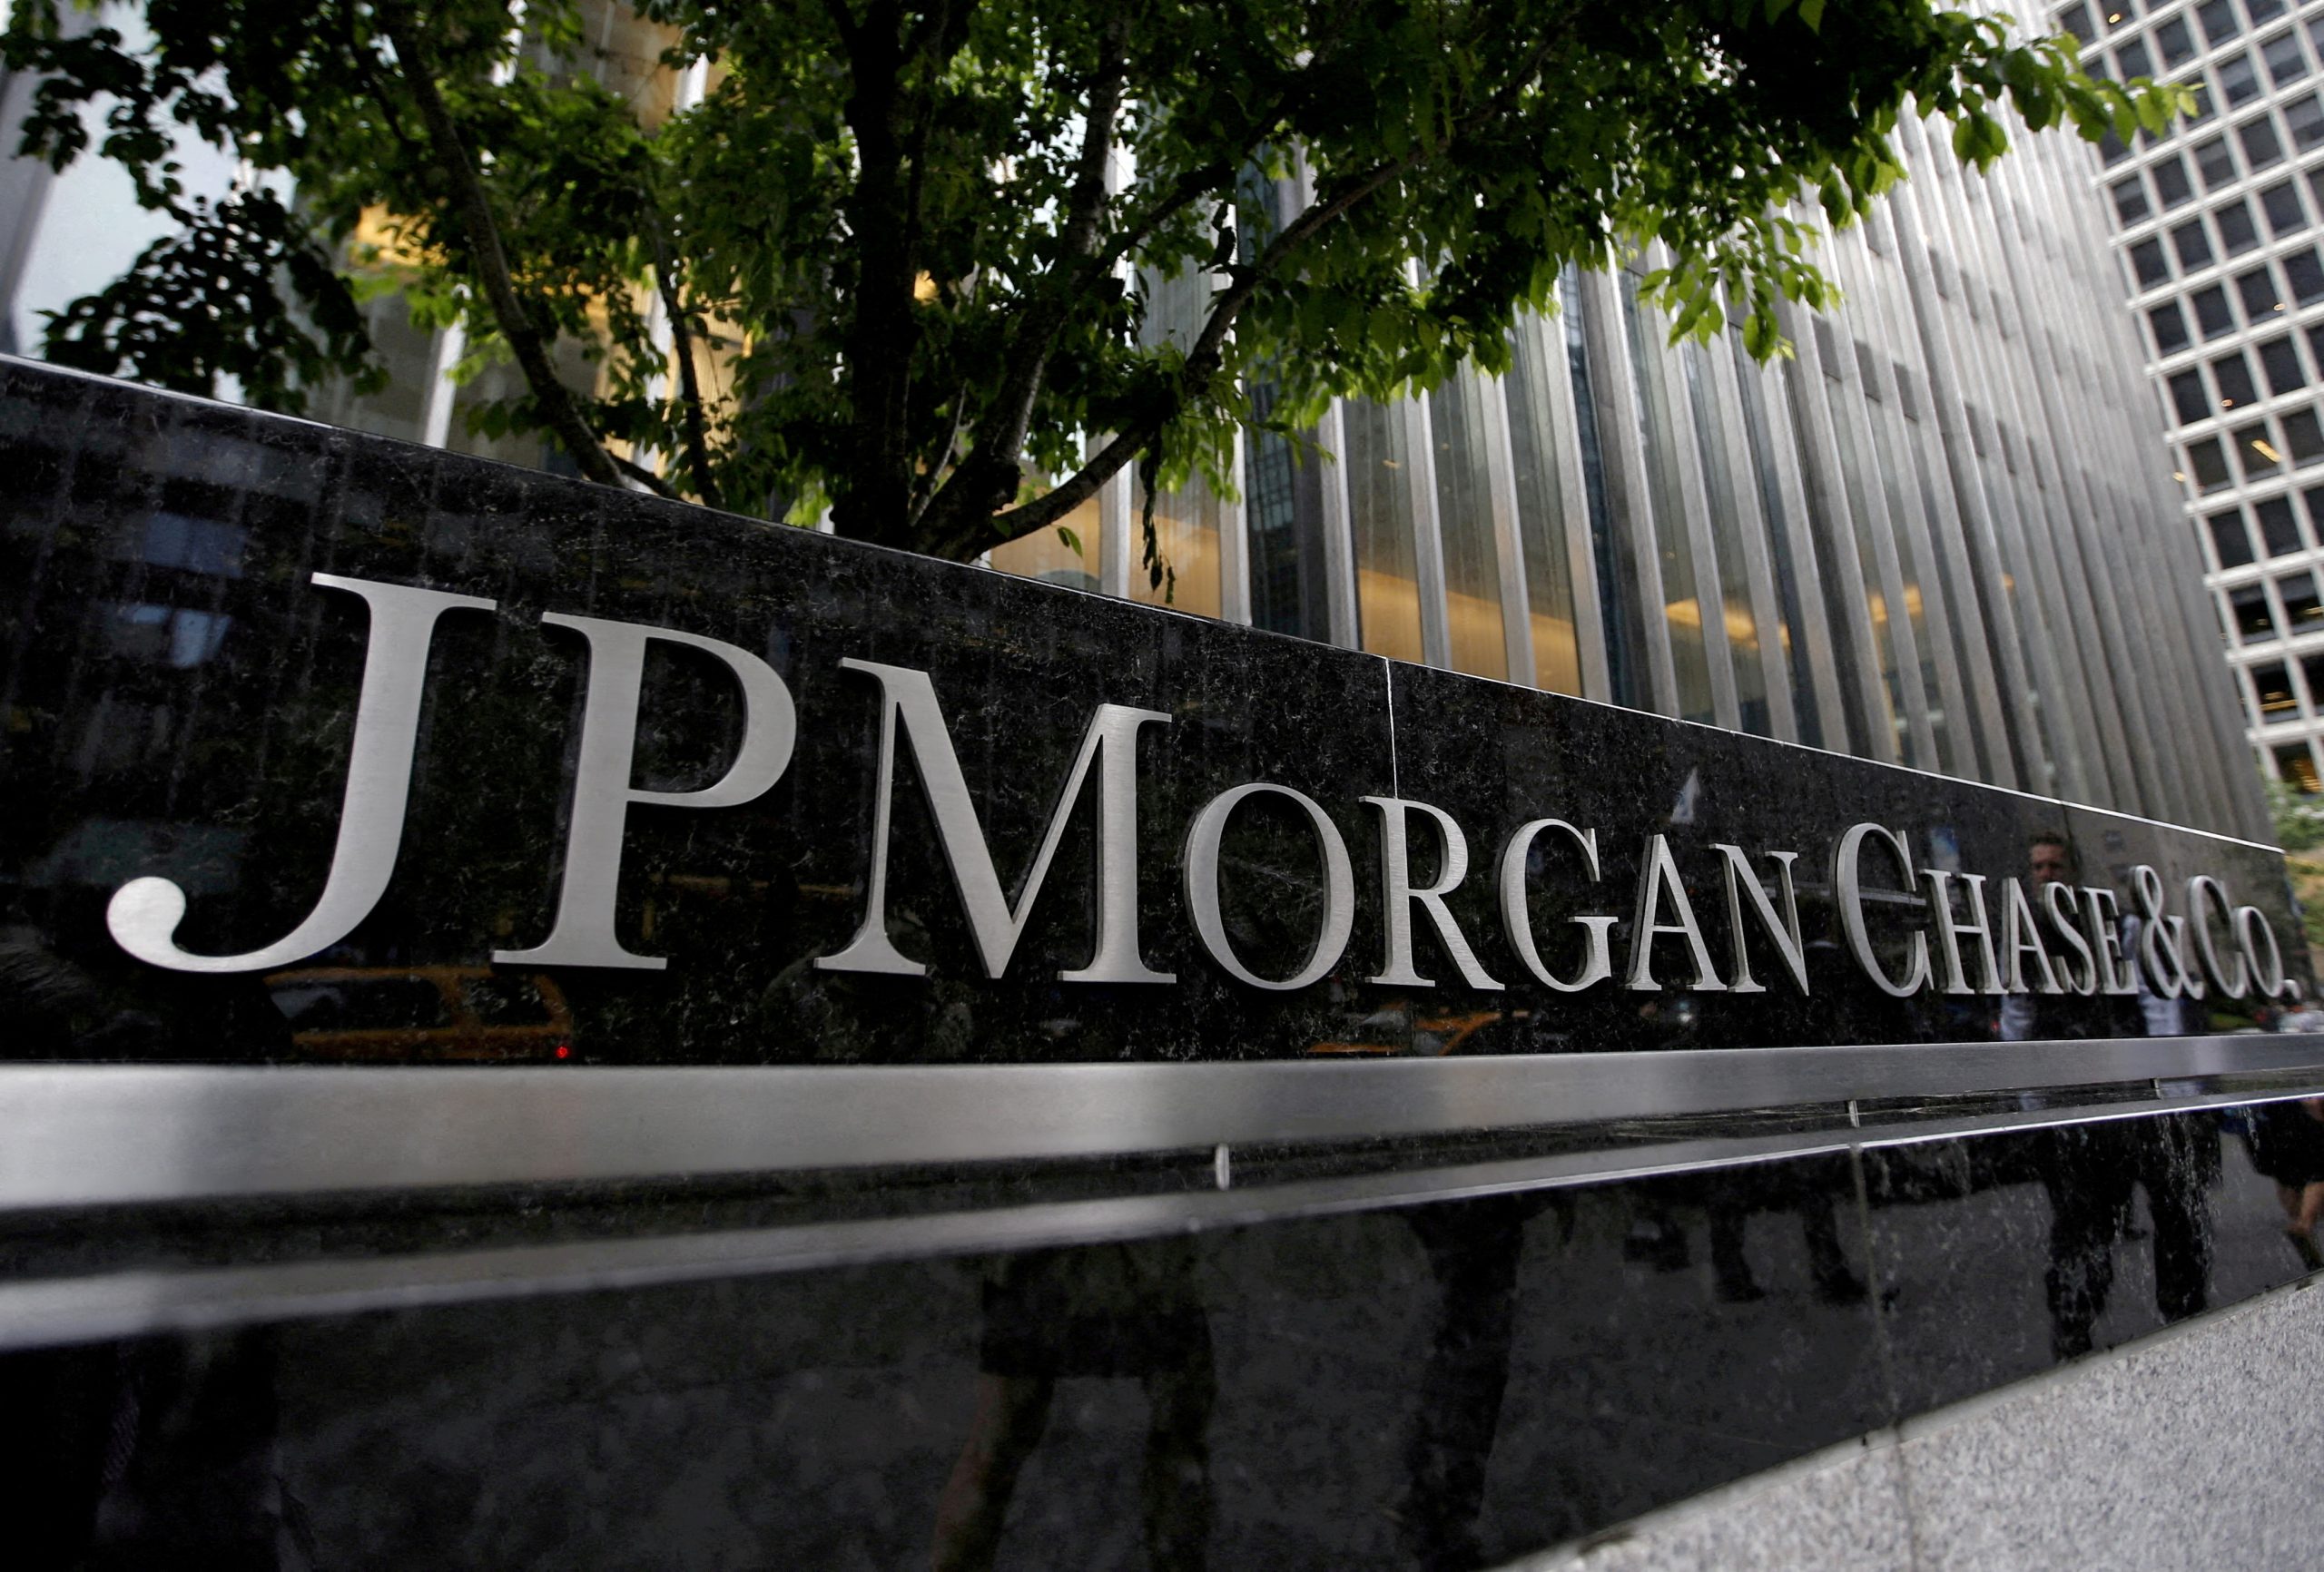 JPMorgan subsidiary fined by SEC for deleting 47 million emails, including those linked to subpoenas